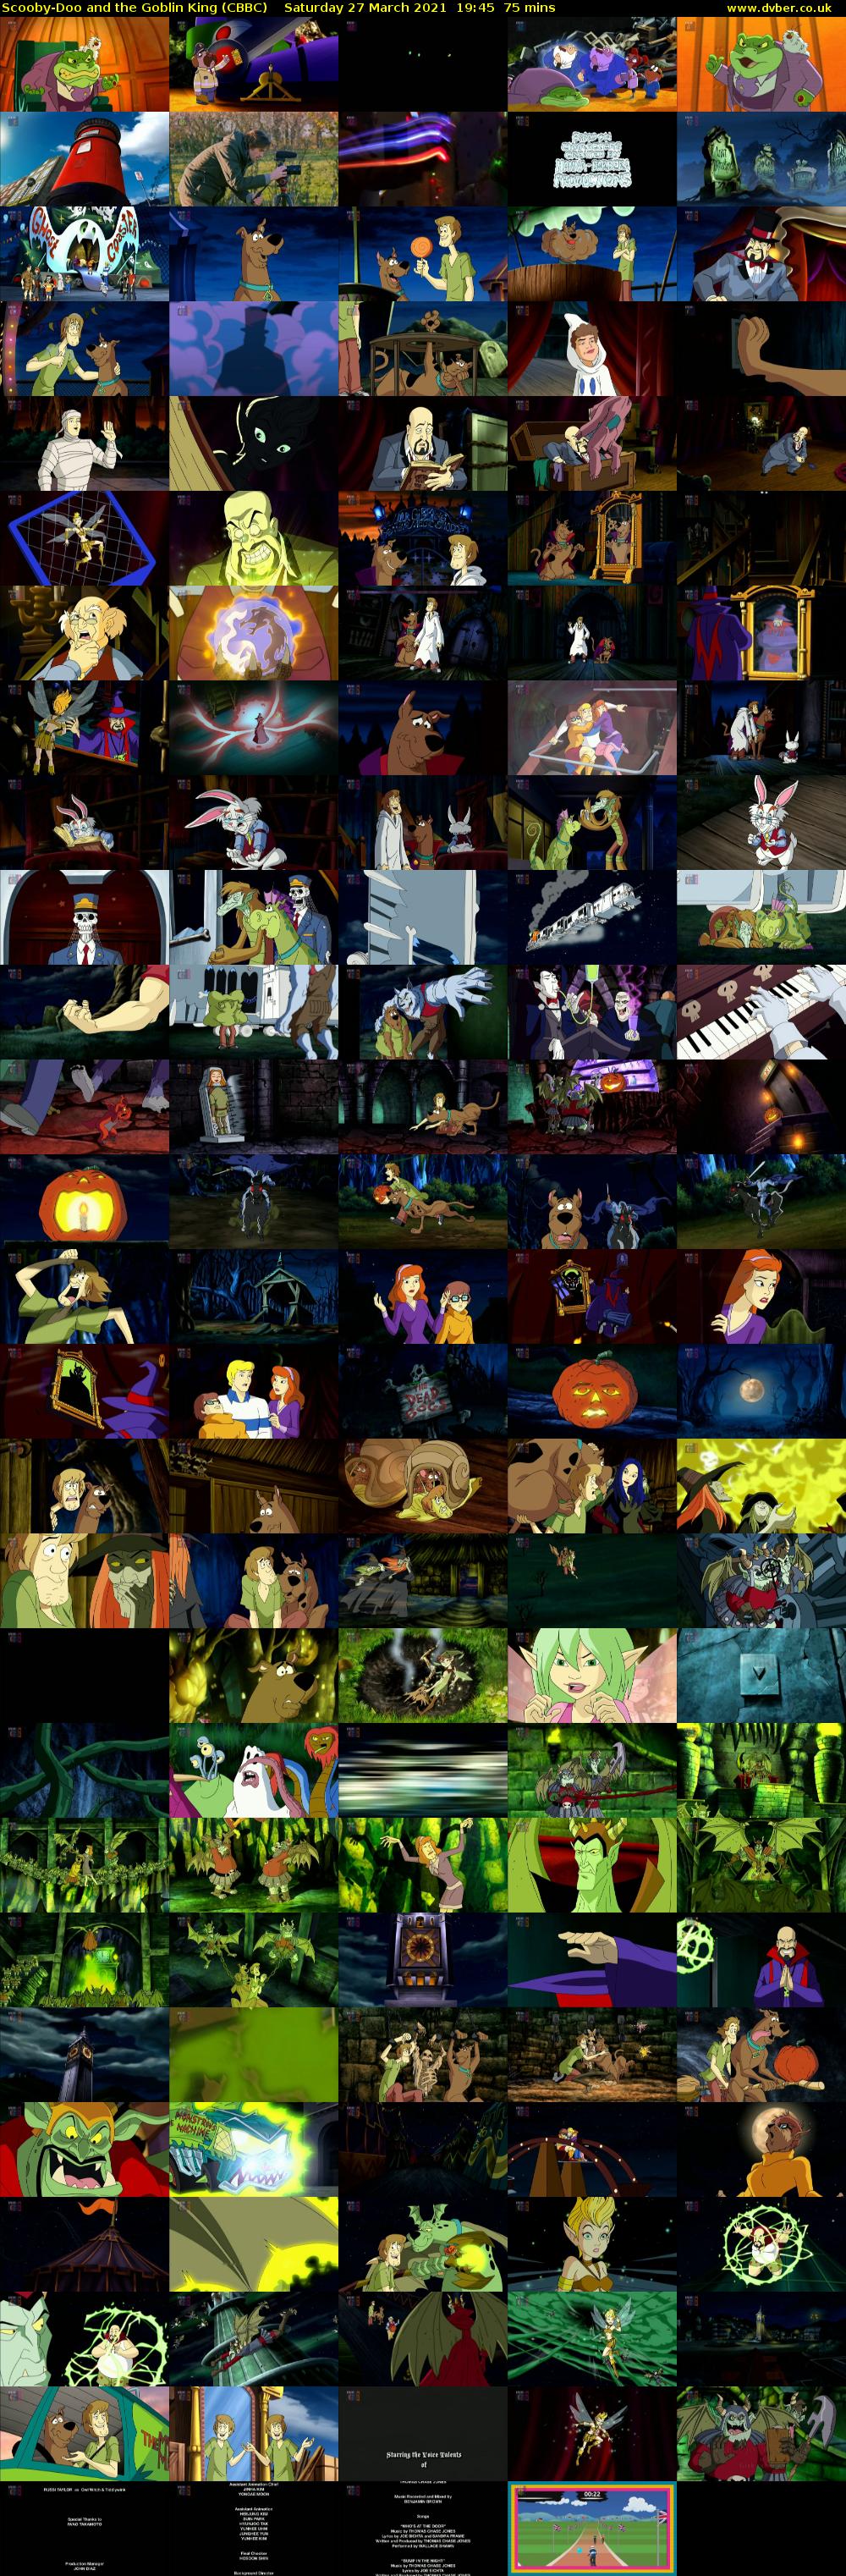 Scooby-Doo and the Goblin King (CBBC) Saturday 27 March 2021 19:45 - 21:00